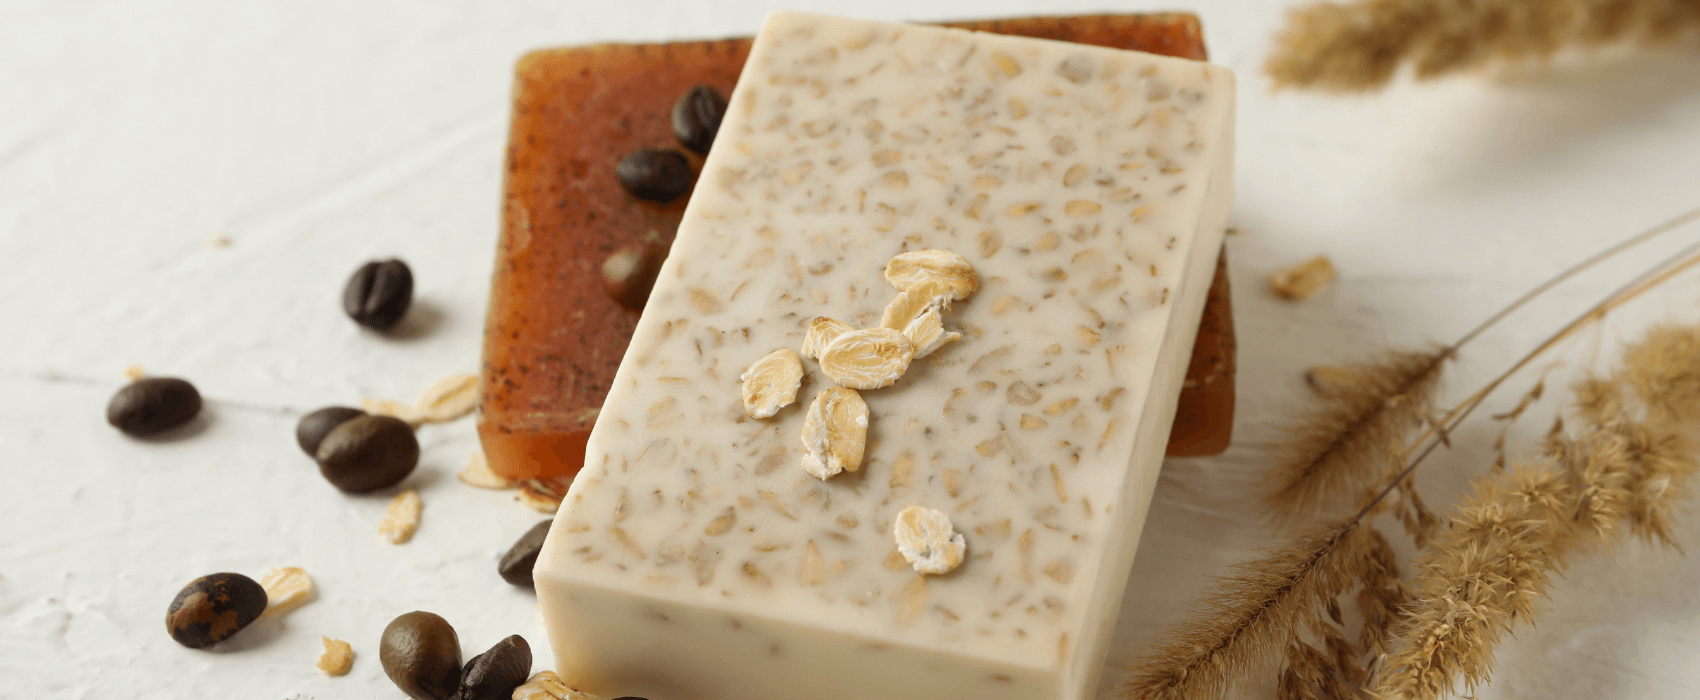 Blog - Unveiling the secrets of natural body soaps